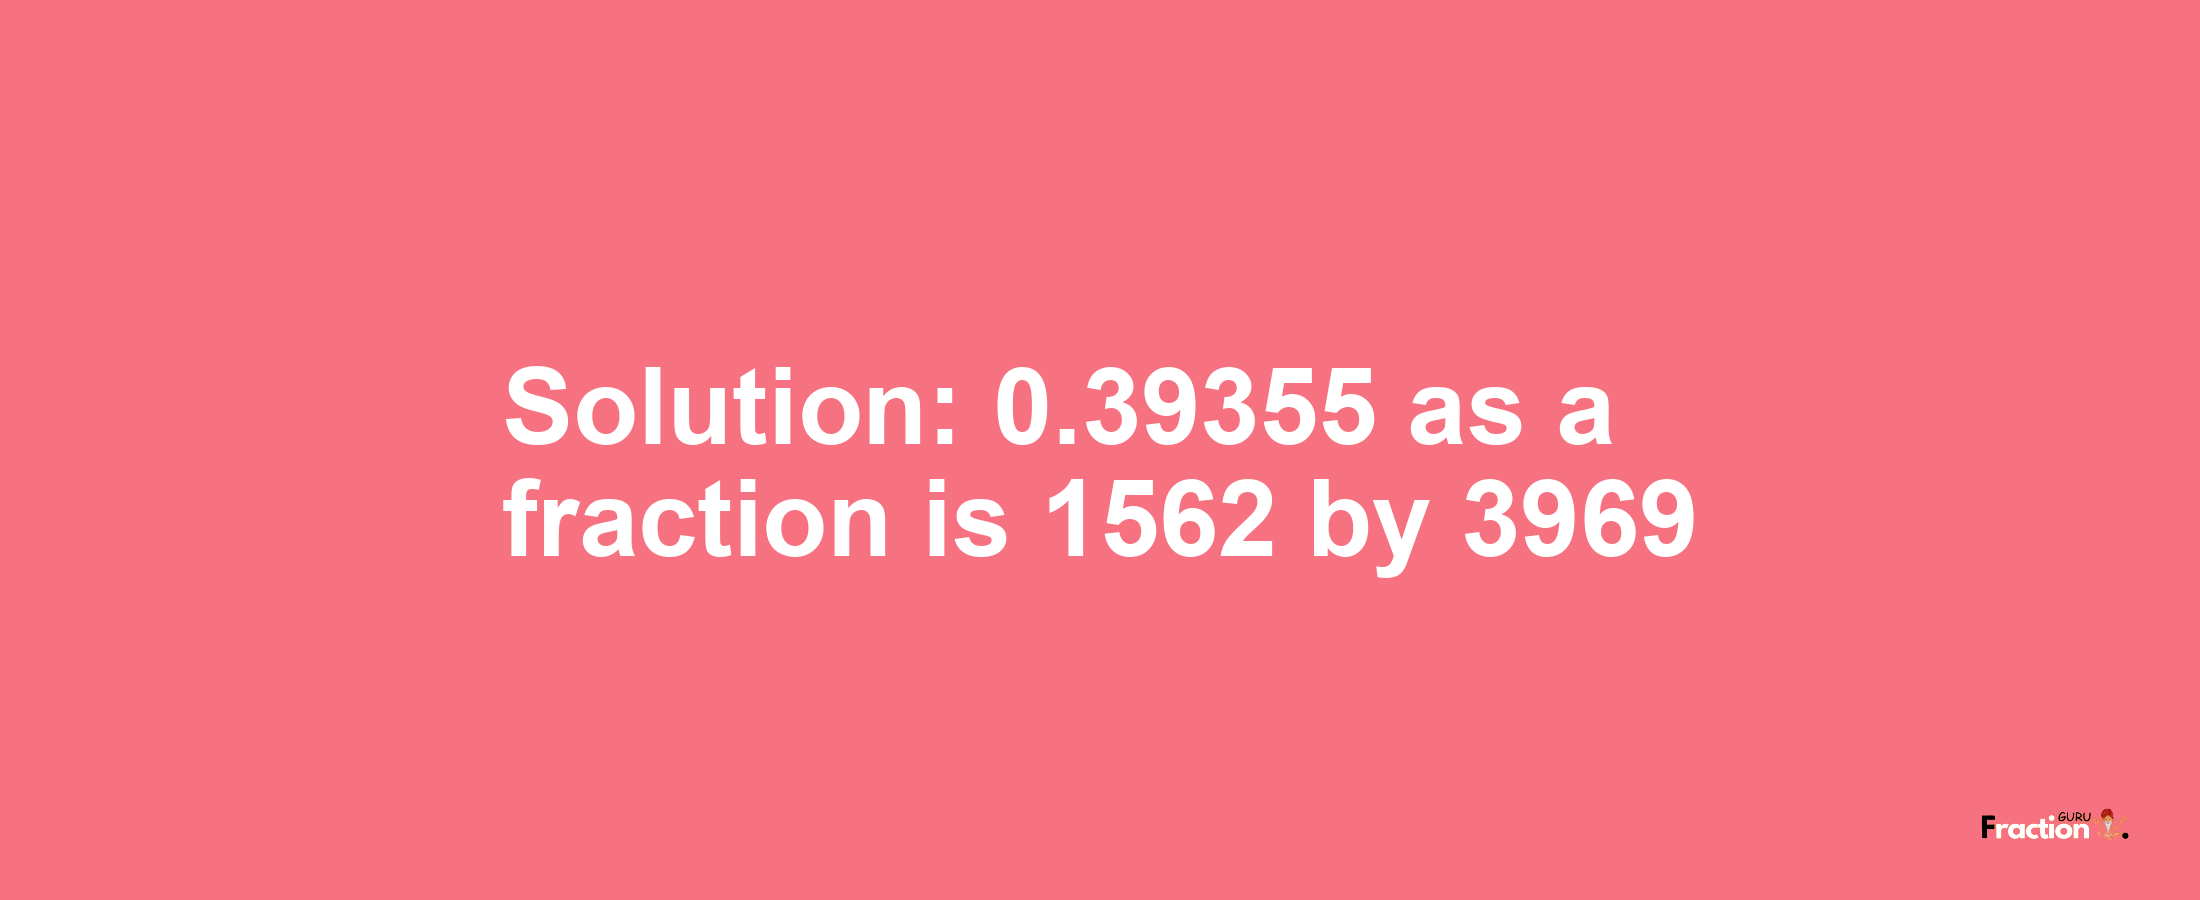 Solution:0.39355 as a fraction is 1562/3969